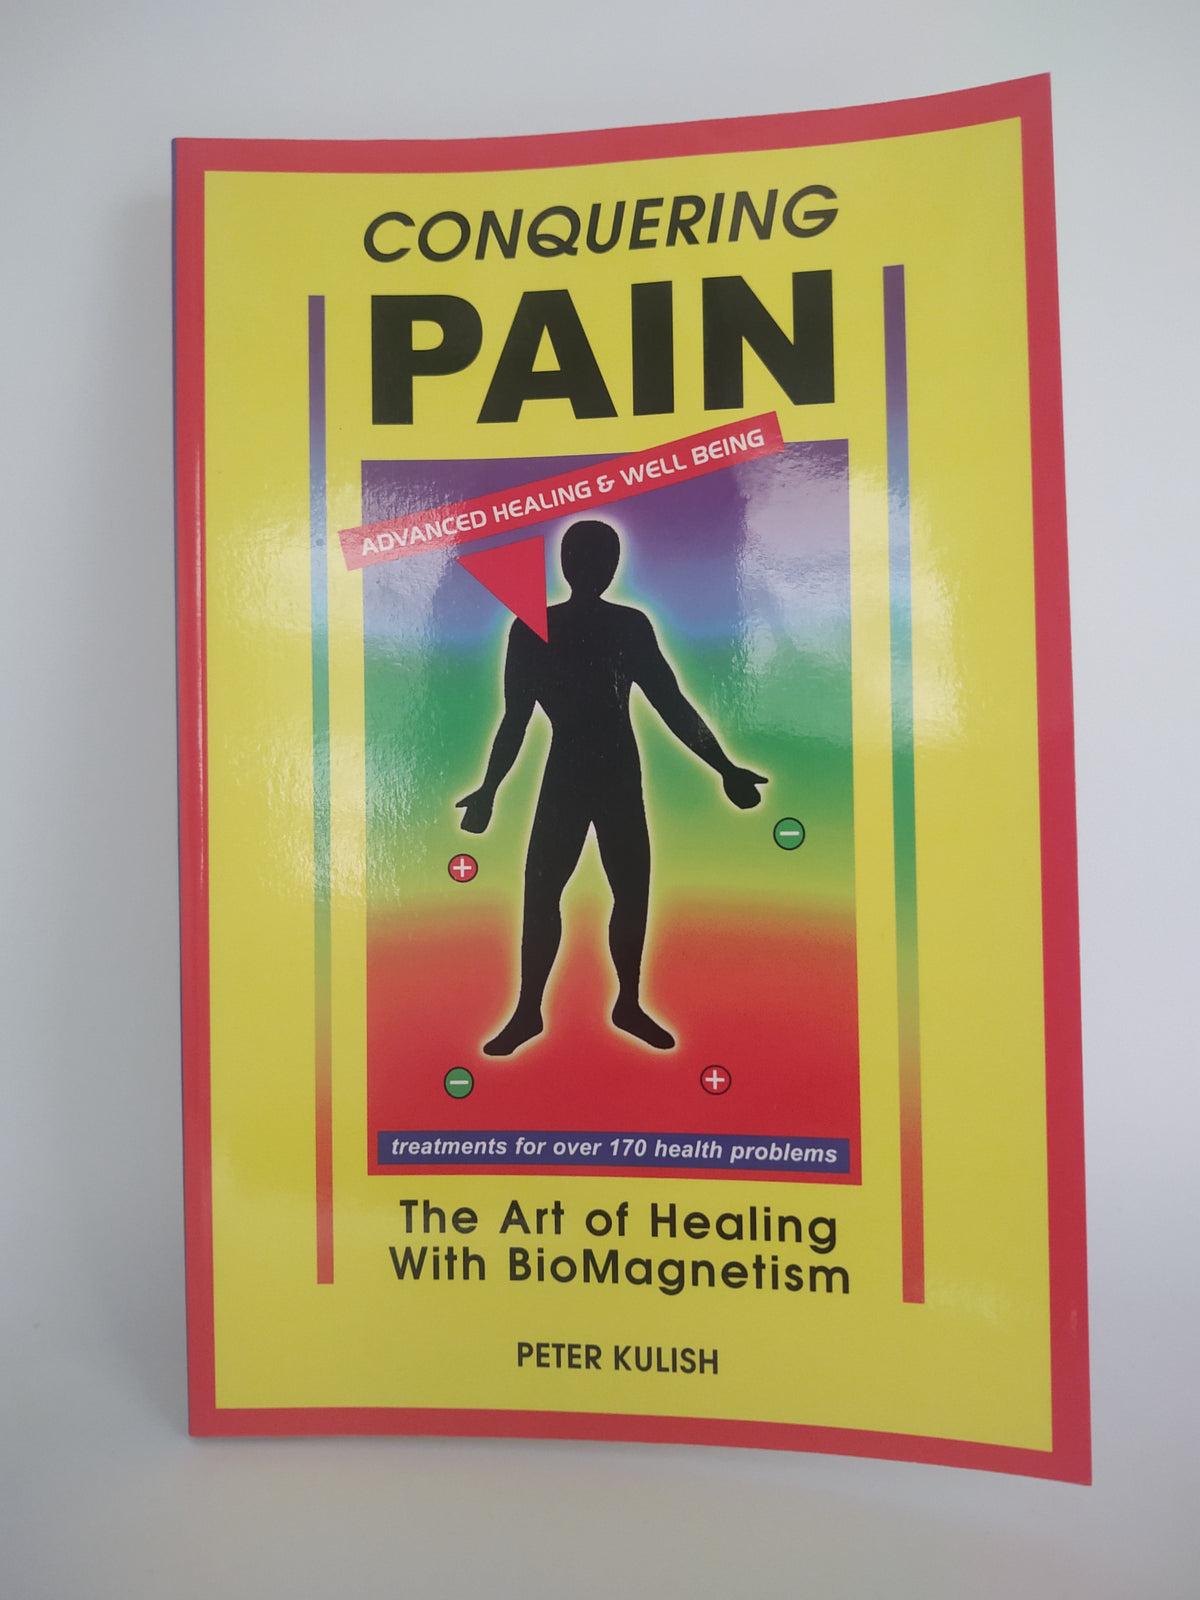 Conquering Pain - The Art of Healing with BioMagnetism